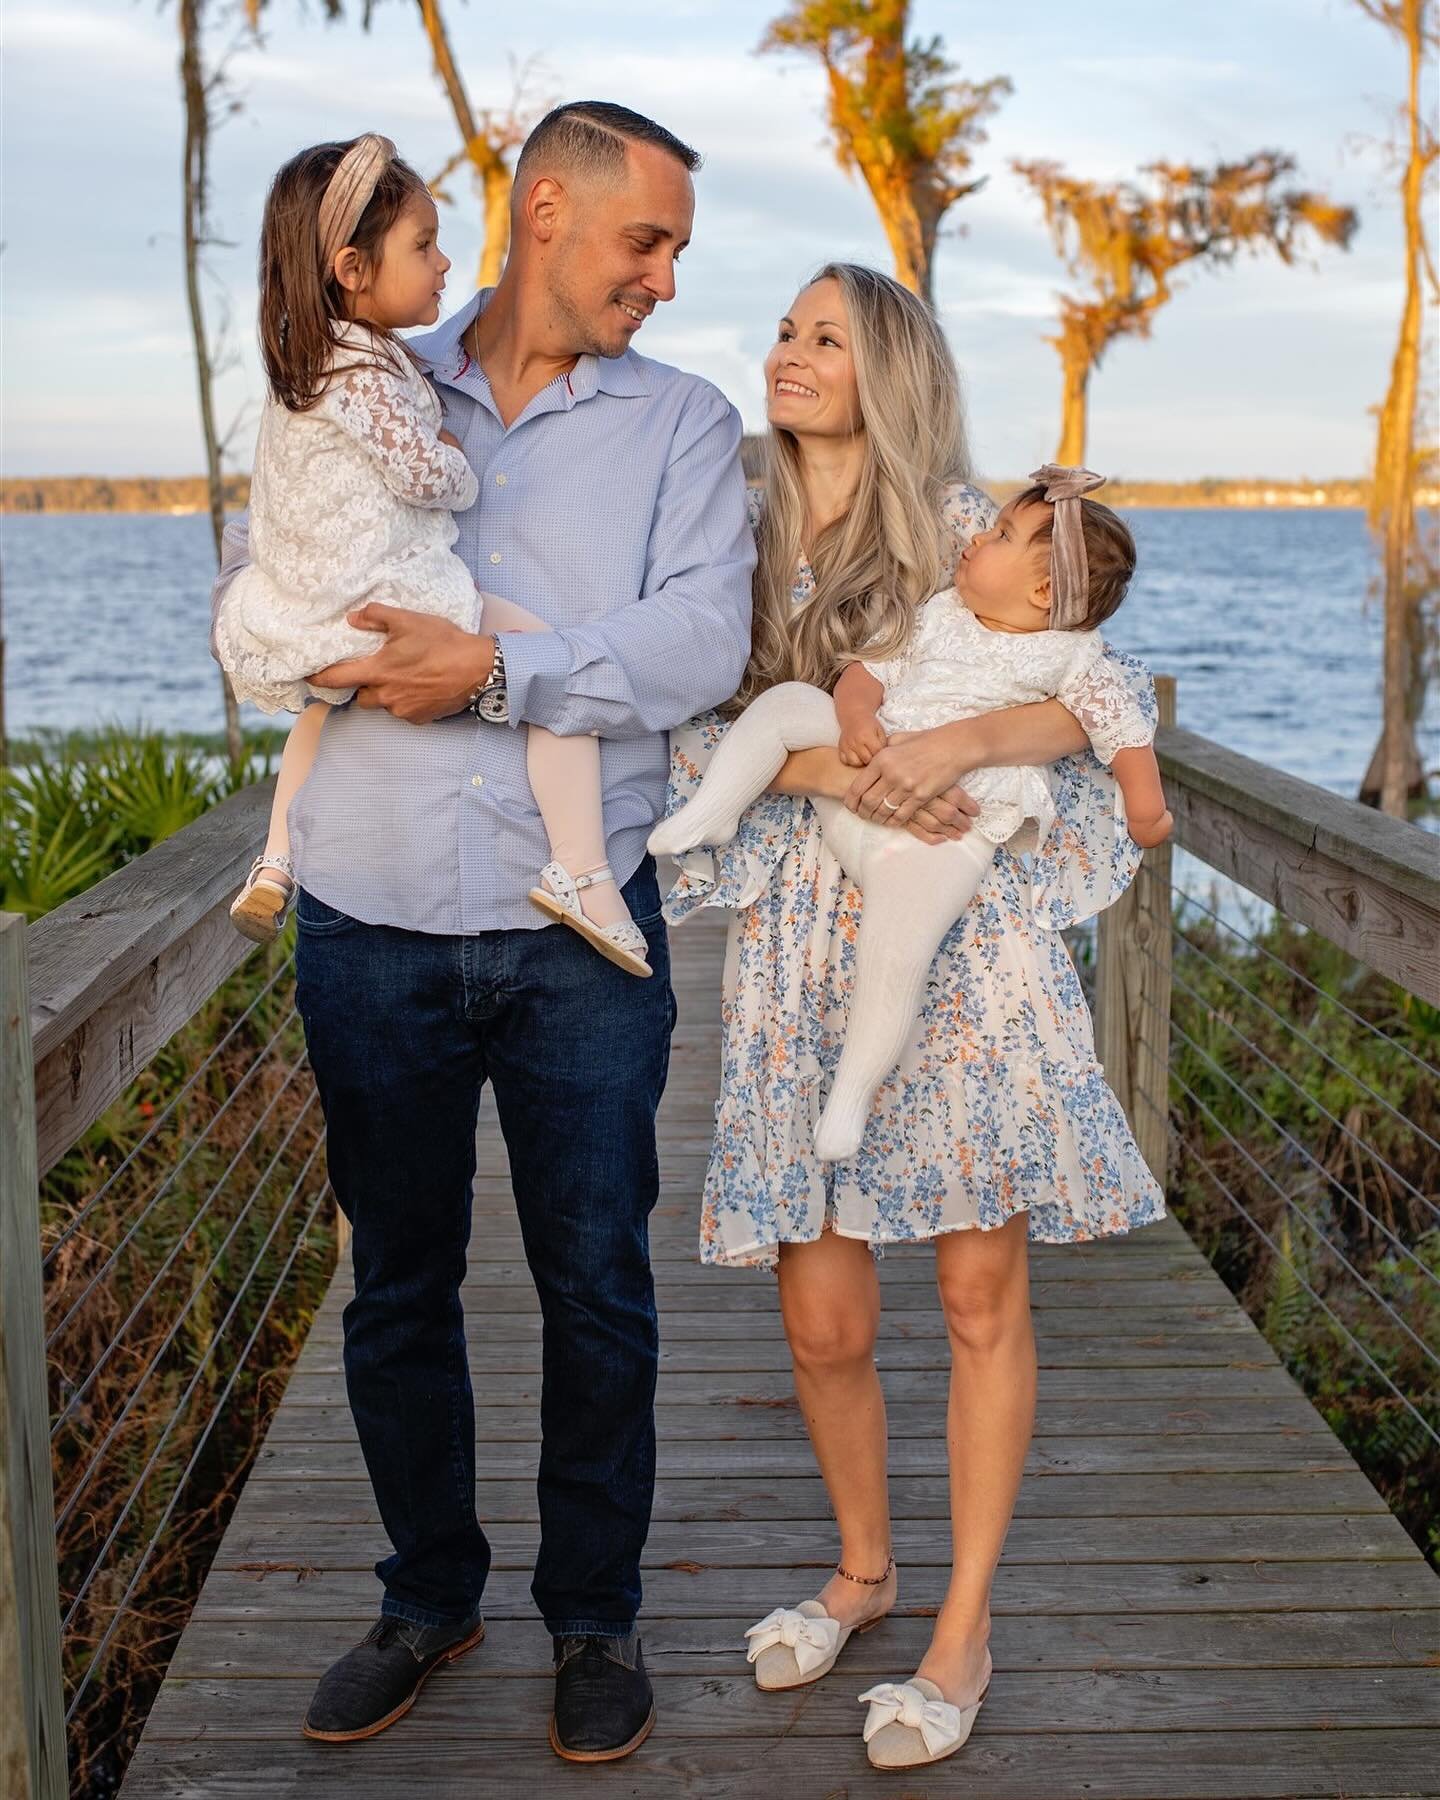 On one of the coldest days of last year this family still showed up and gave me the cutest shoot! I love this family ❤️❤️❤️ #family #photoshoot #orlando #florida